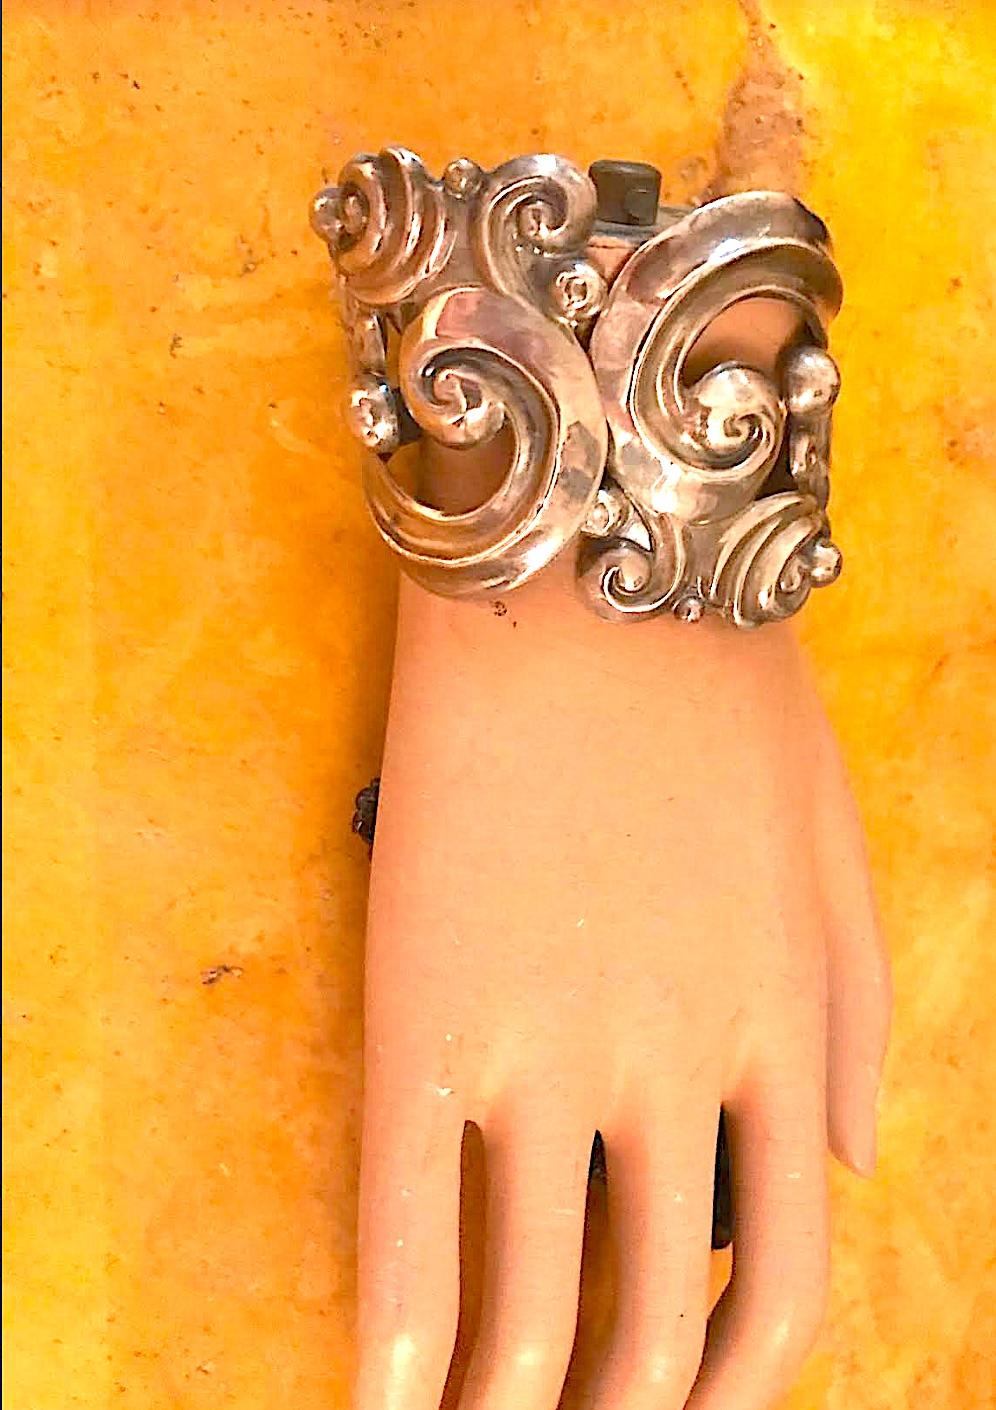 Women's Superb Rare Mexico Sterling Silver Clamper Bracelet c. 1940s by Antonio Pineda For Sale